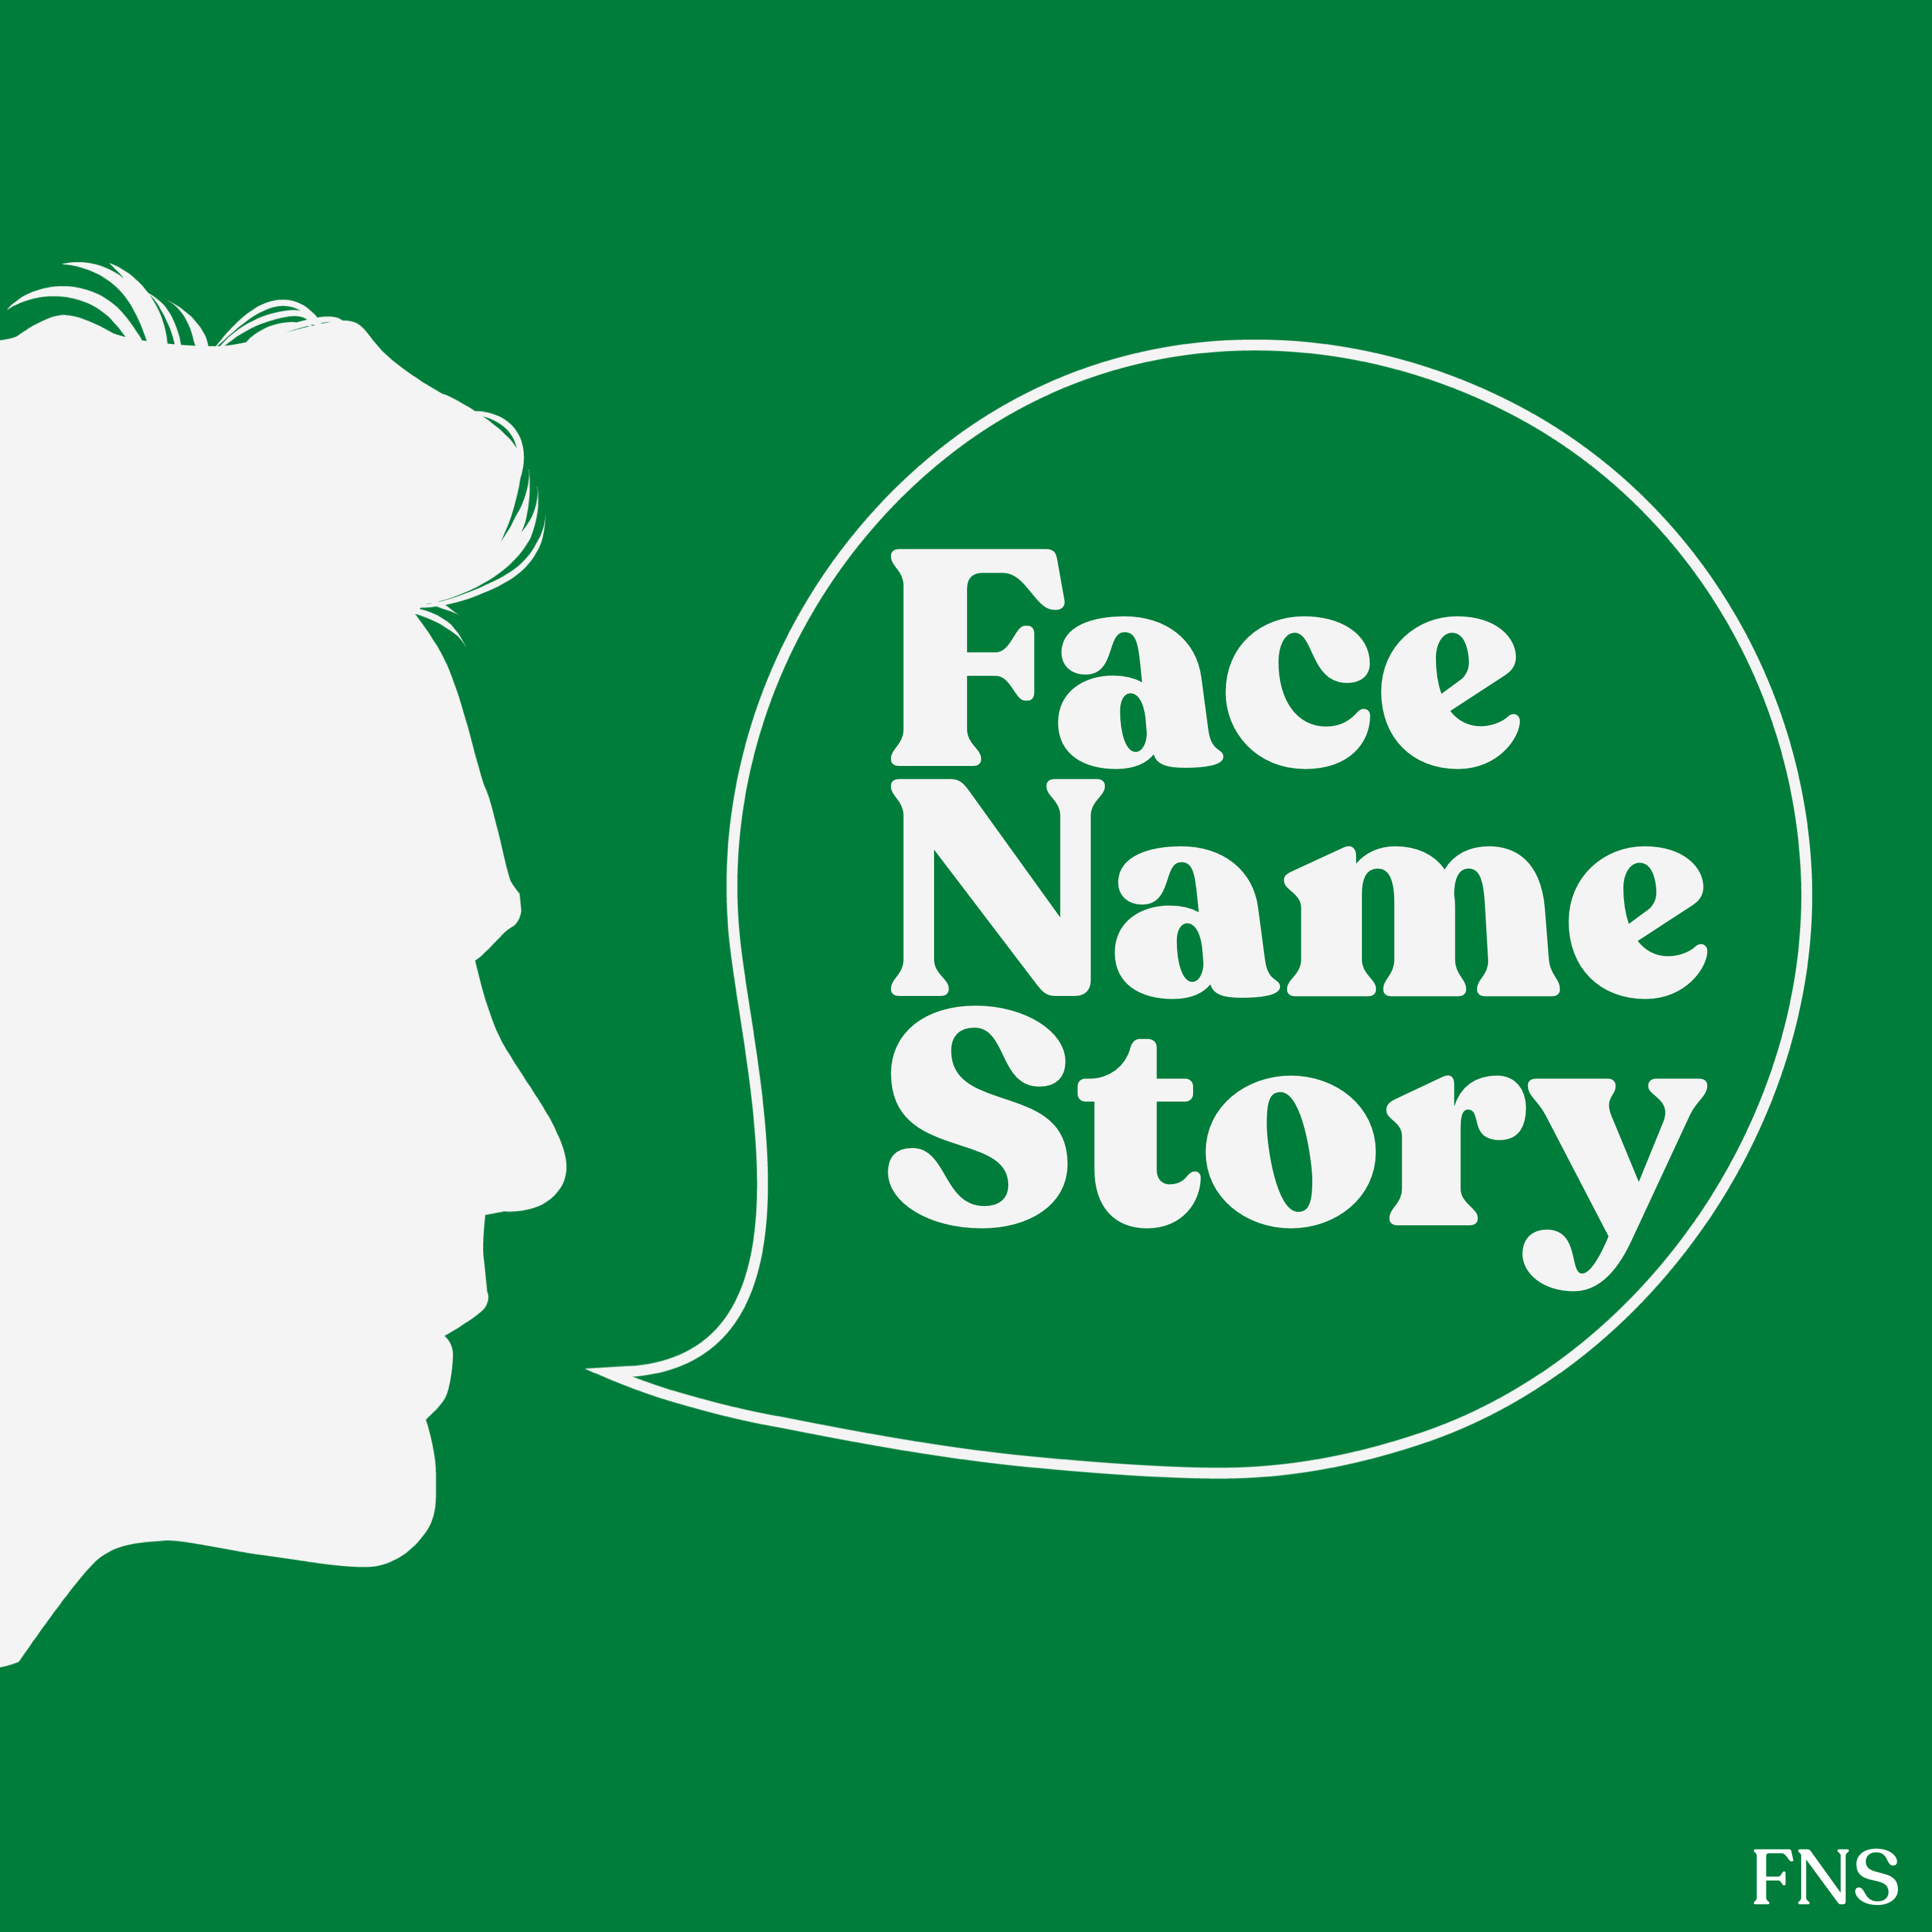 Face, Name, Story